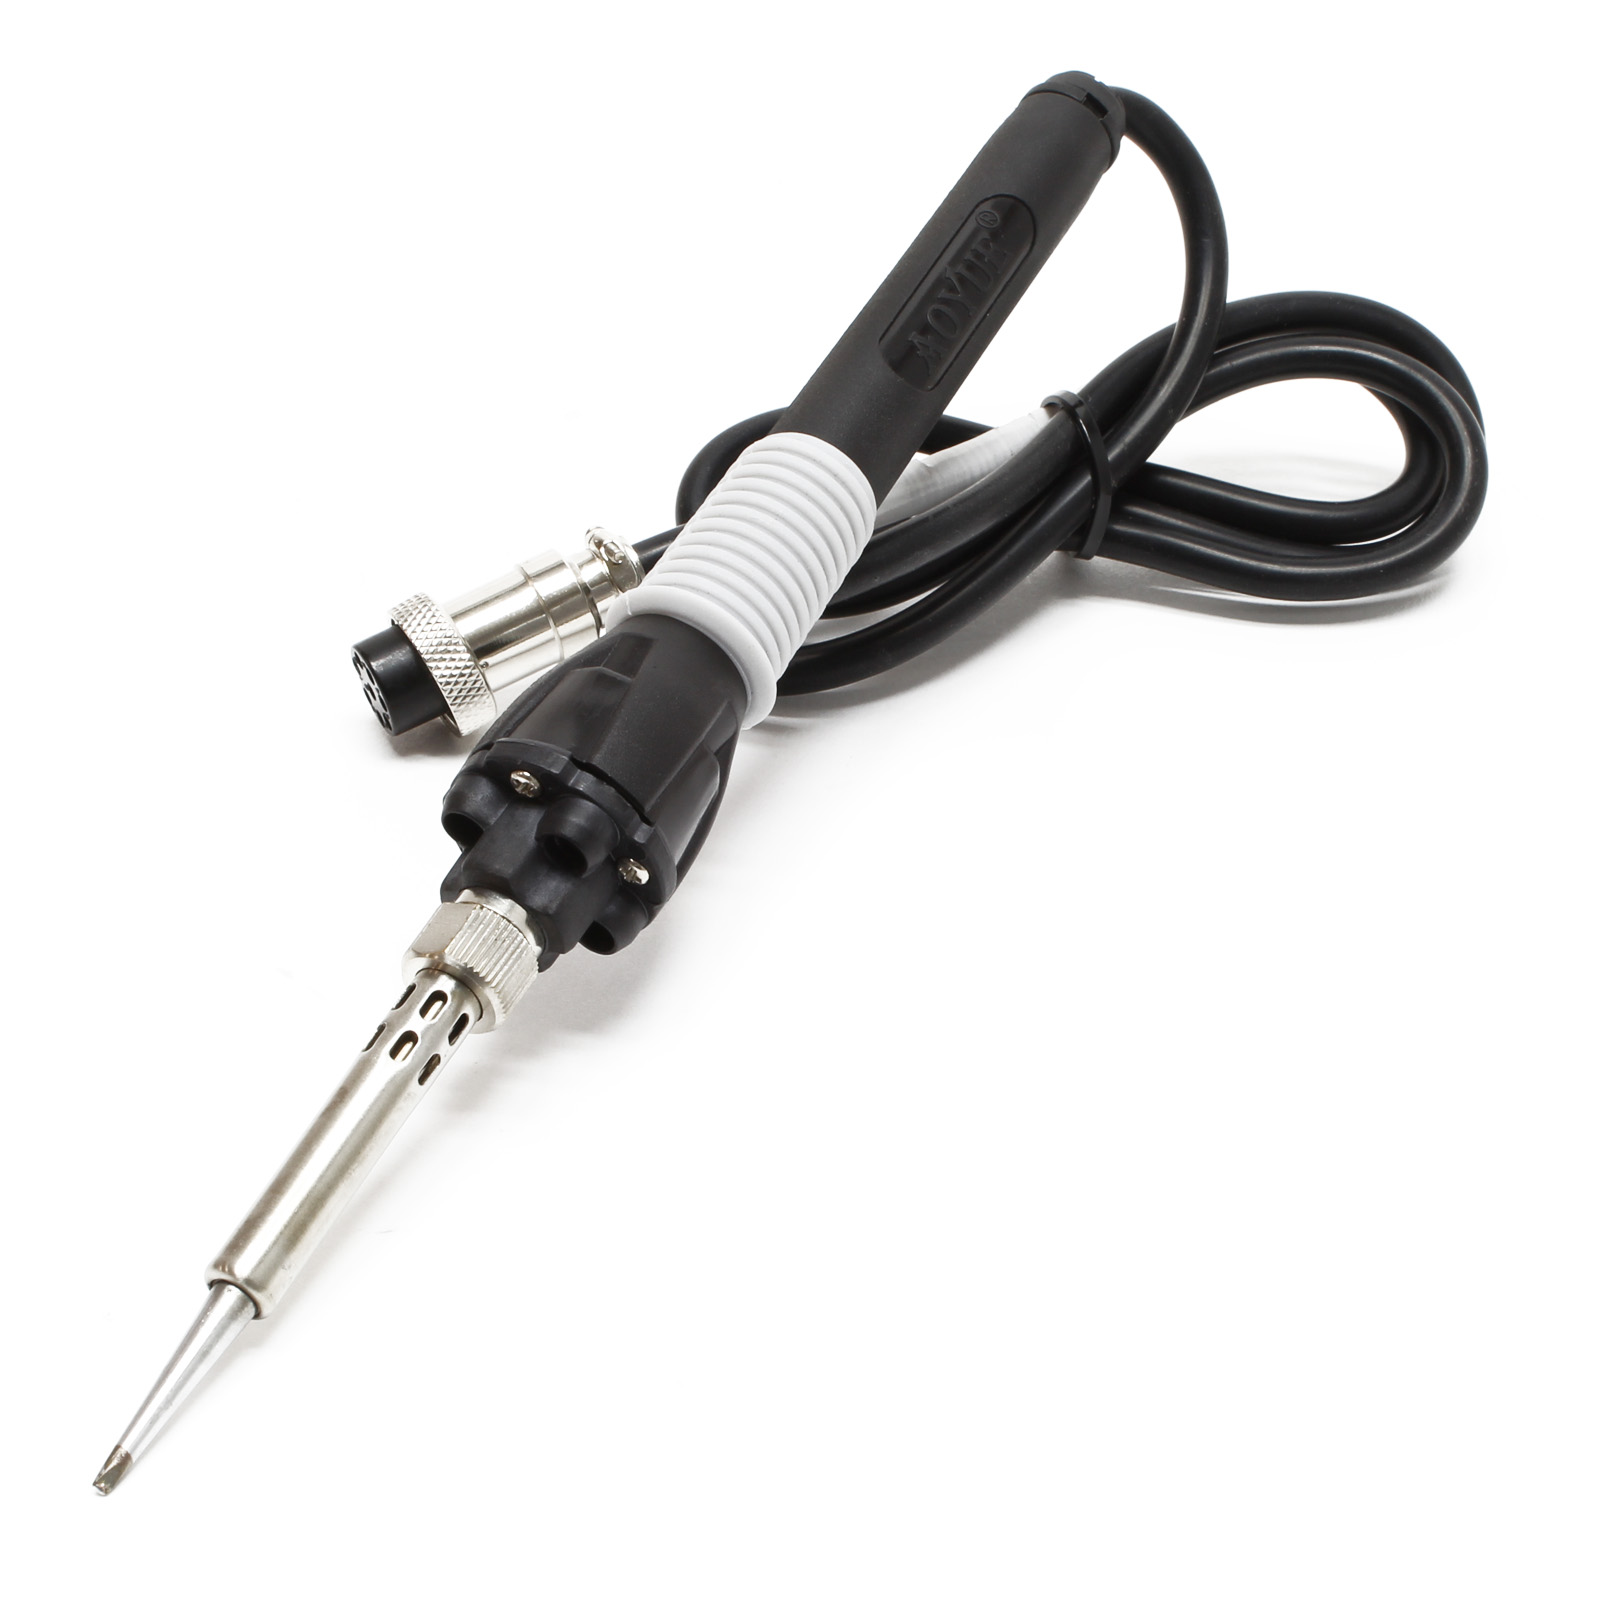 AOYUE B033-P Soldering Iron w/ Light for INT9378 Pro Soldering Station